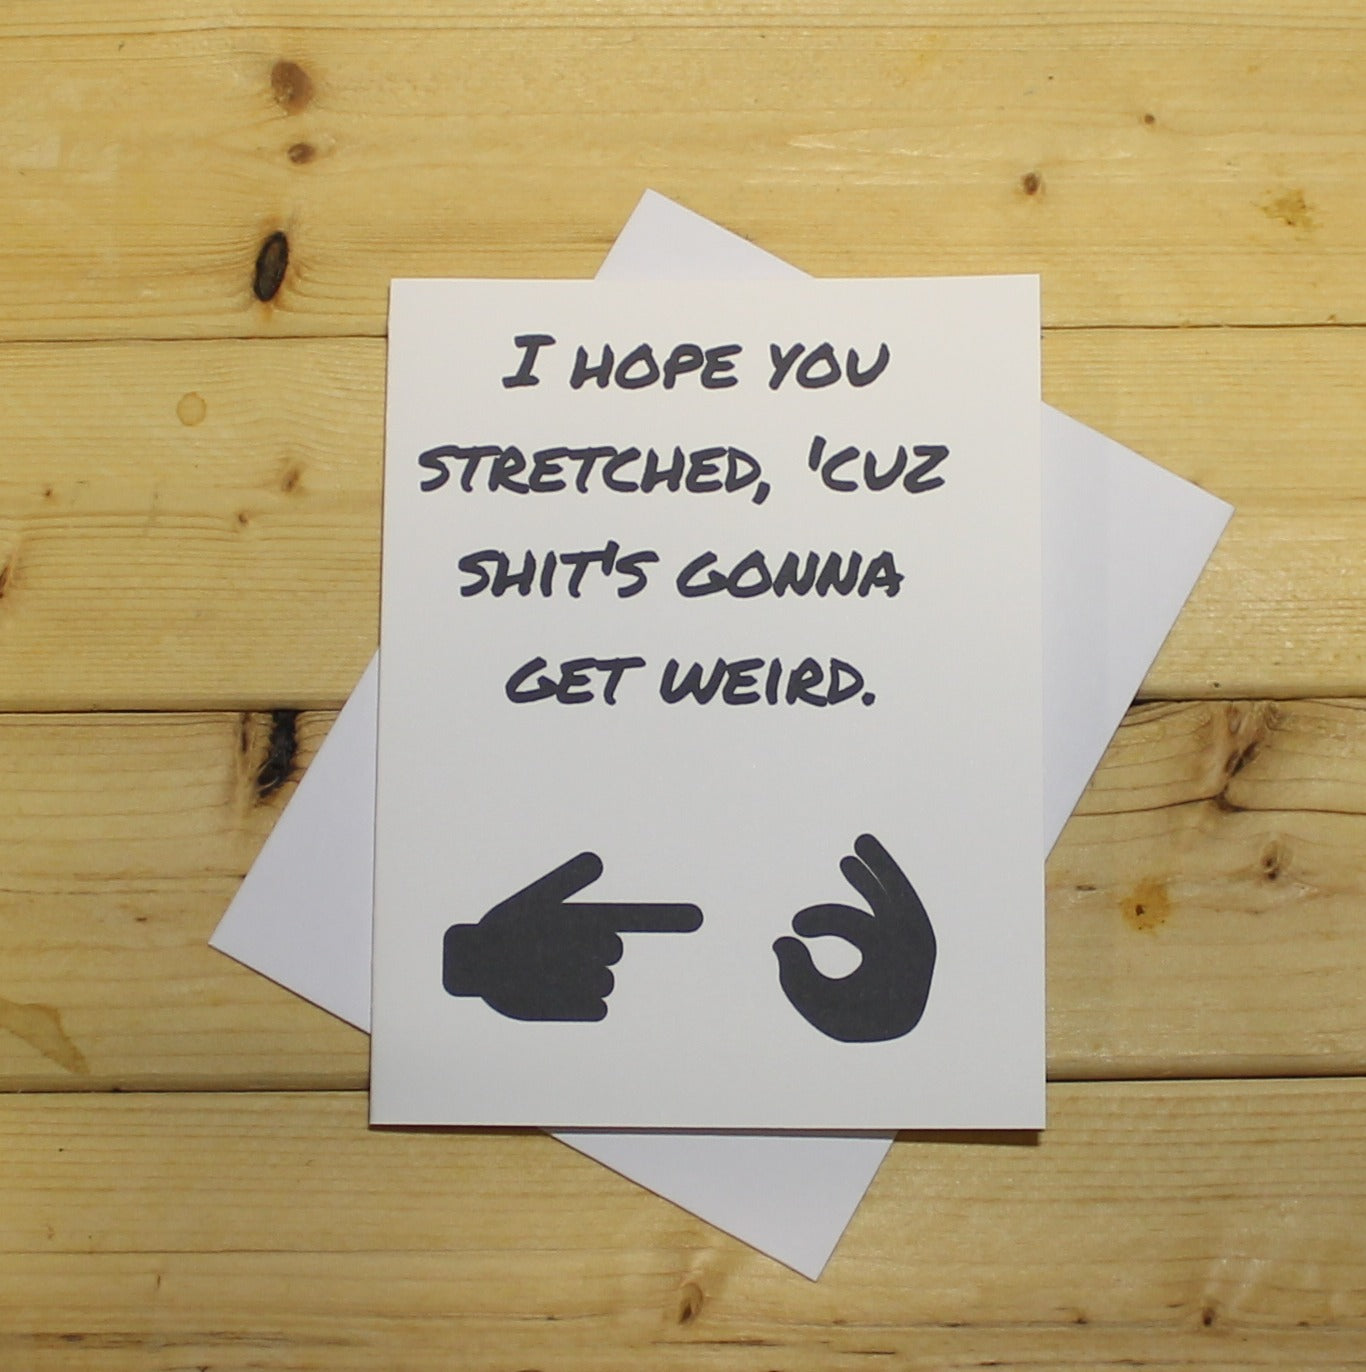 Funny Romantic Card: "I hope you stretched, 'cuz shit's gonna get weird."